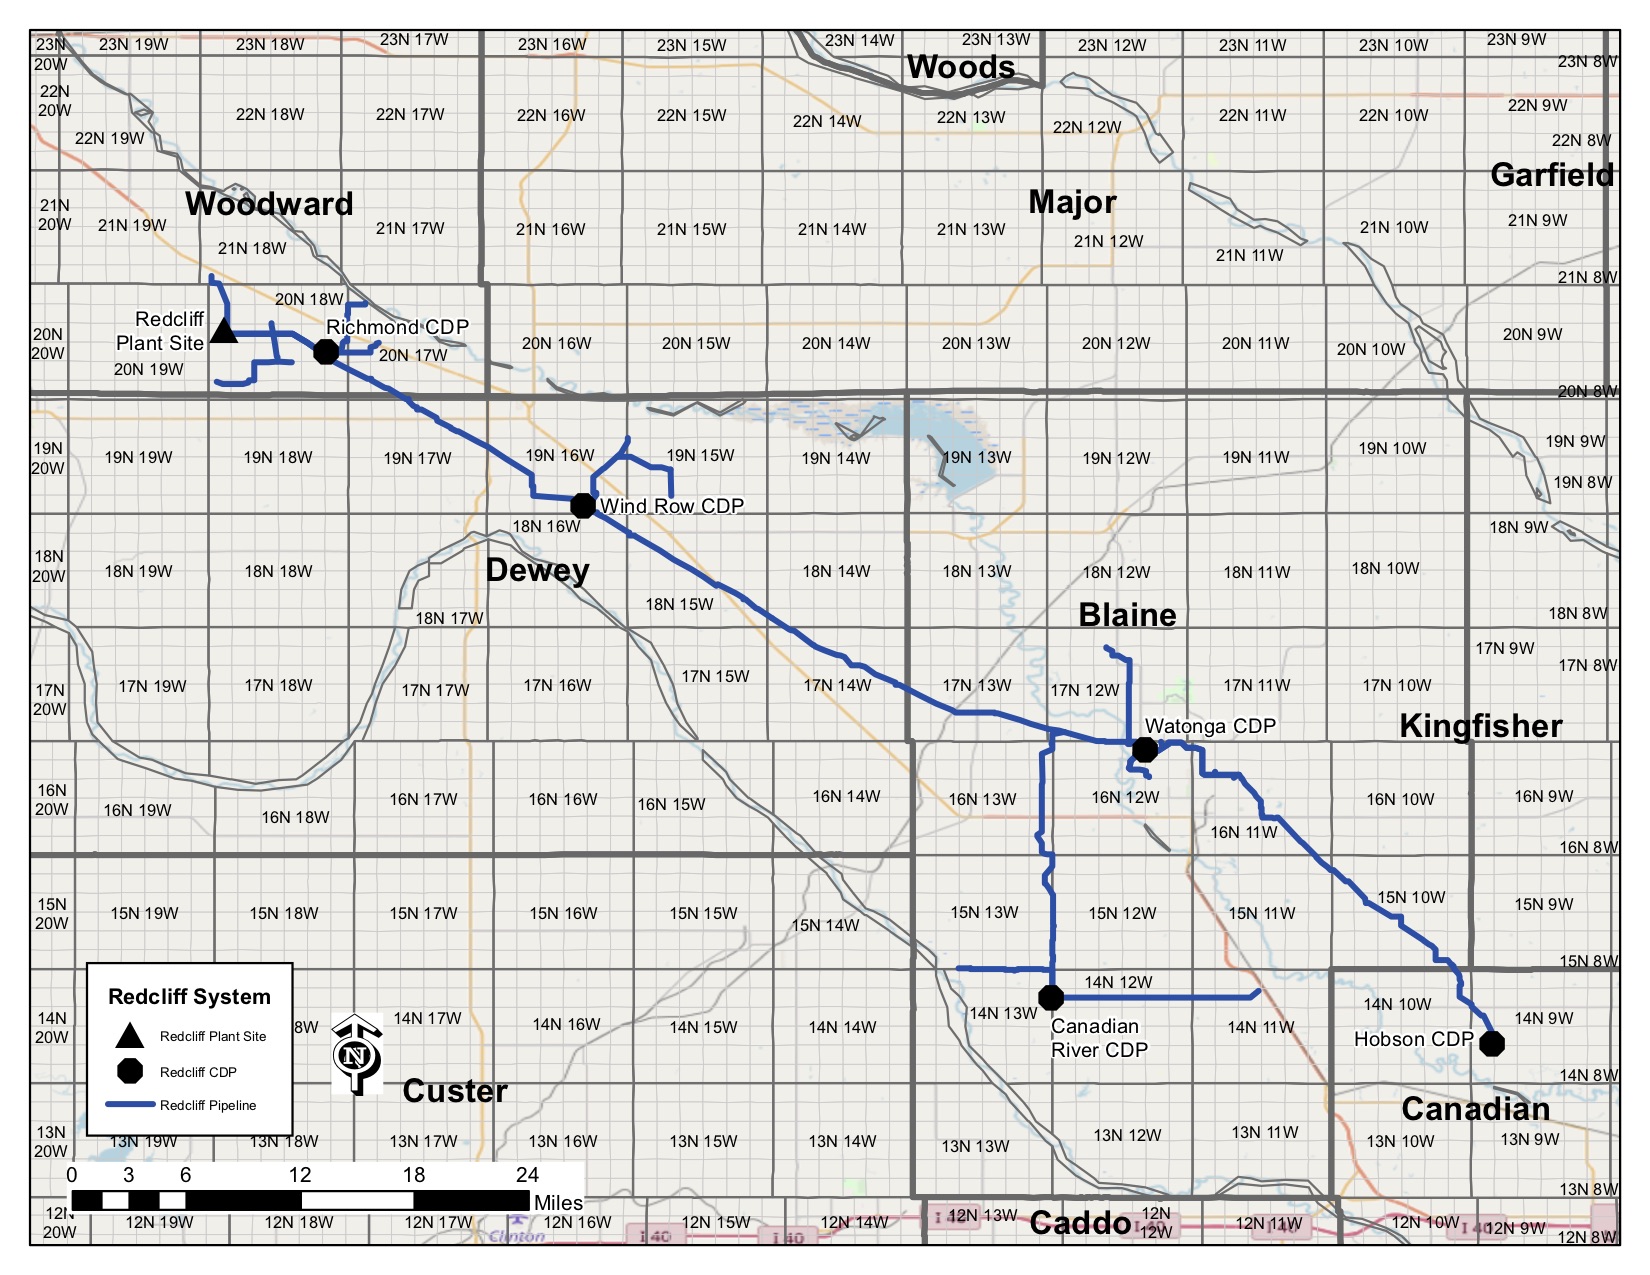 Redcliff Midstream Asset Map (Source: Canyon Midstream Partners LLC)